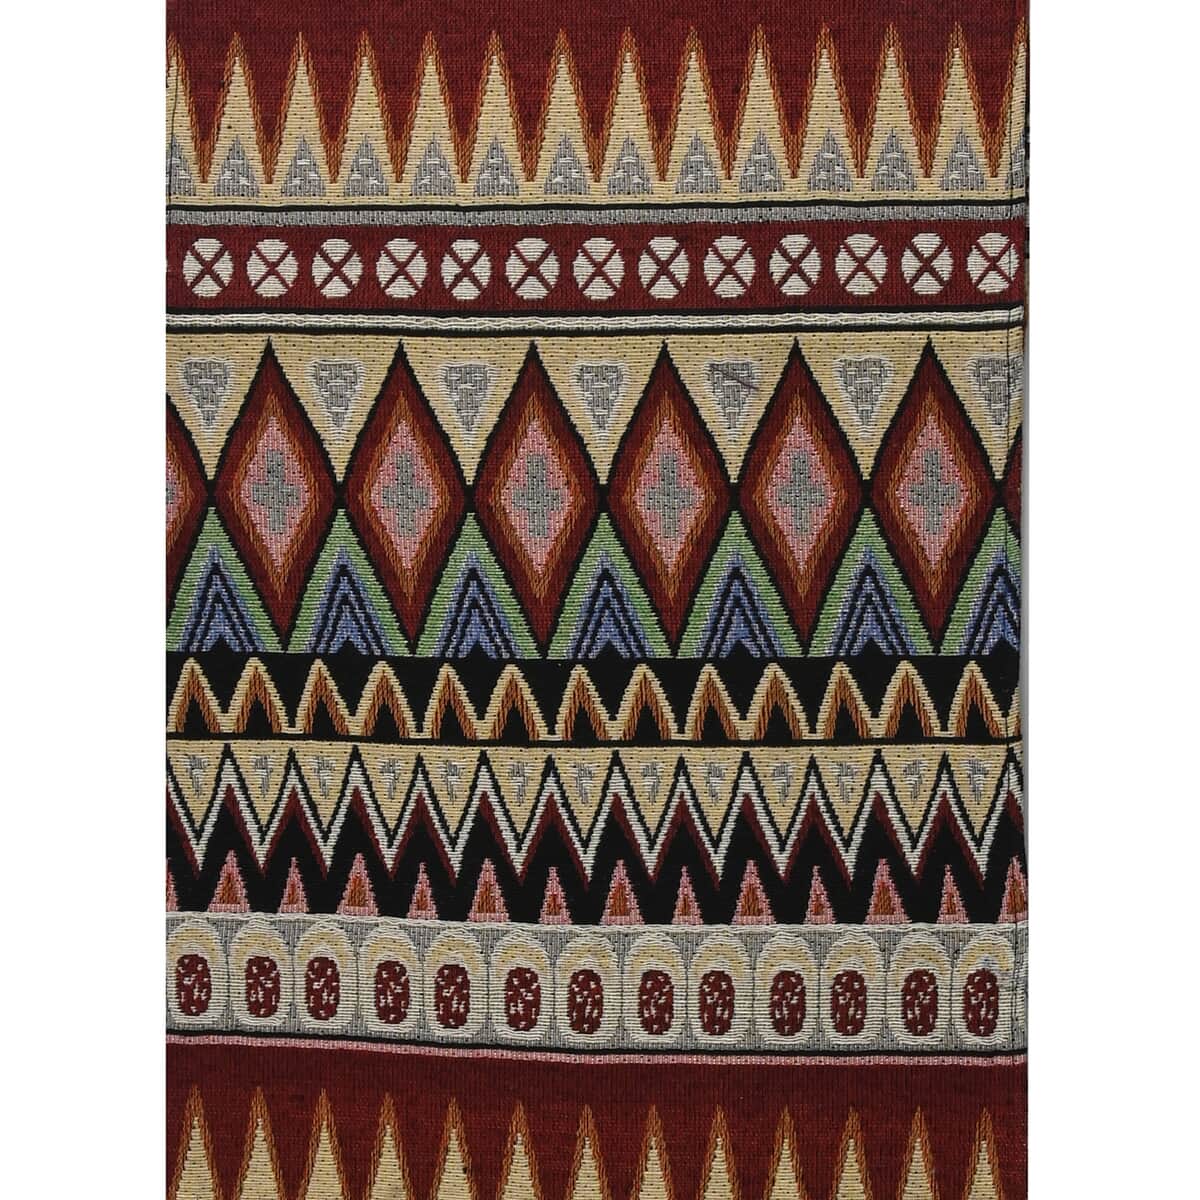 Zig Zag Pattern Poly Cotton Multi Color Table Runner 65% Cotton & 35% Polyester, Washable Runner Rugs, Wrinkle Resistant Table Linen image number 4